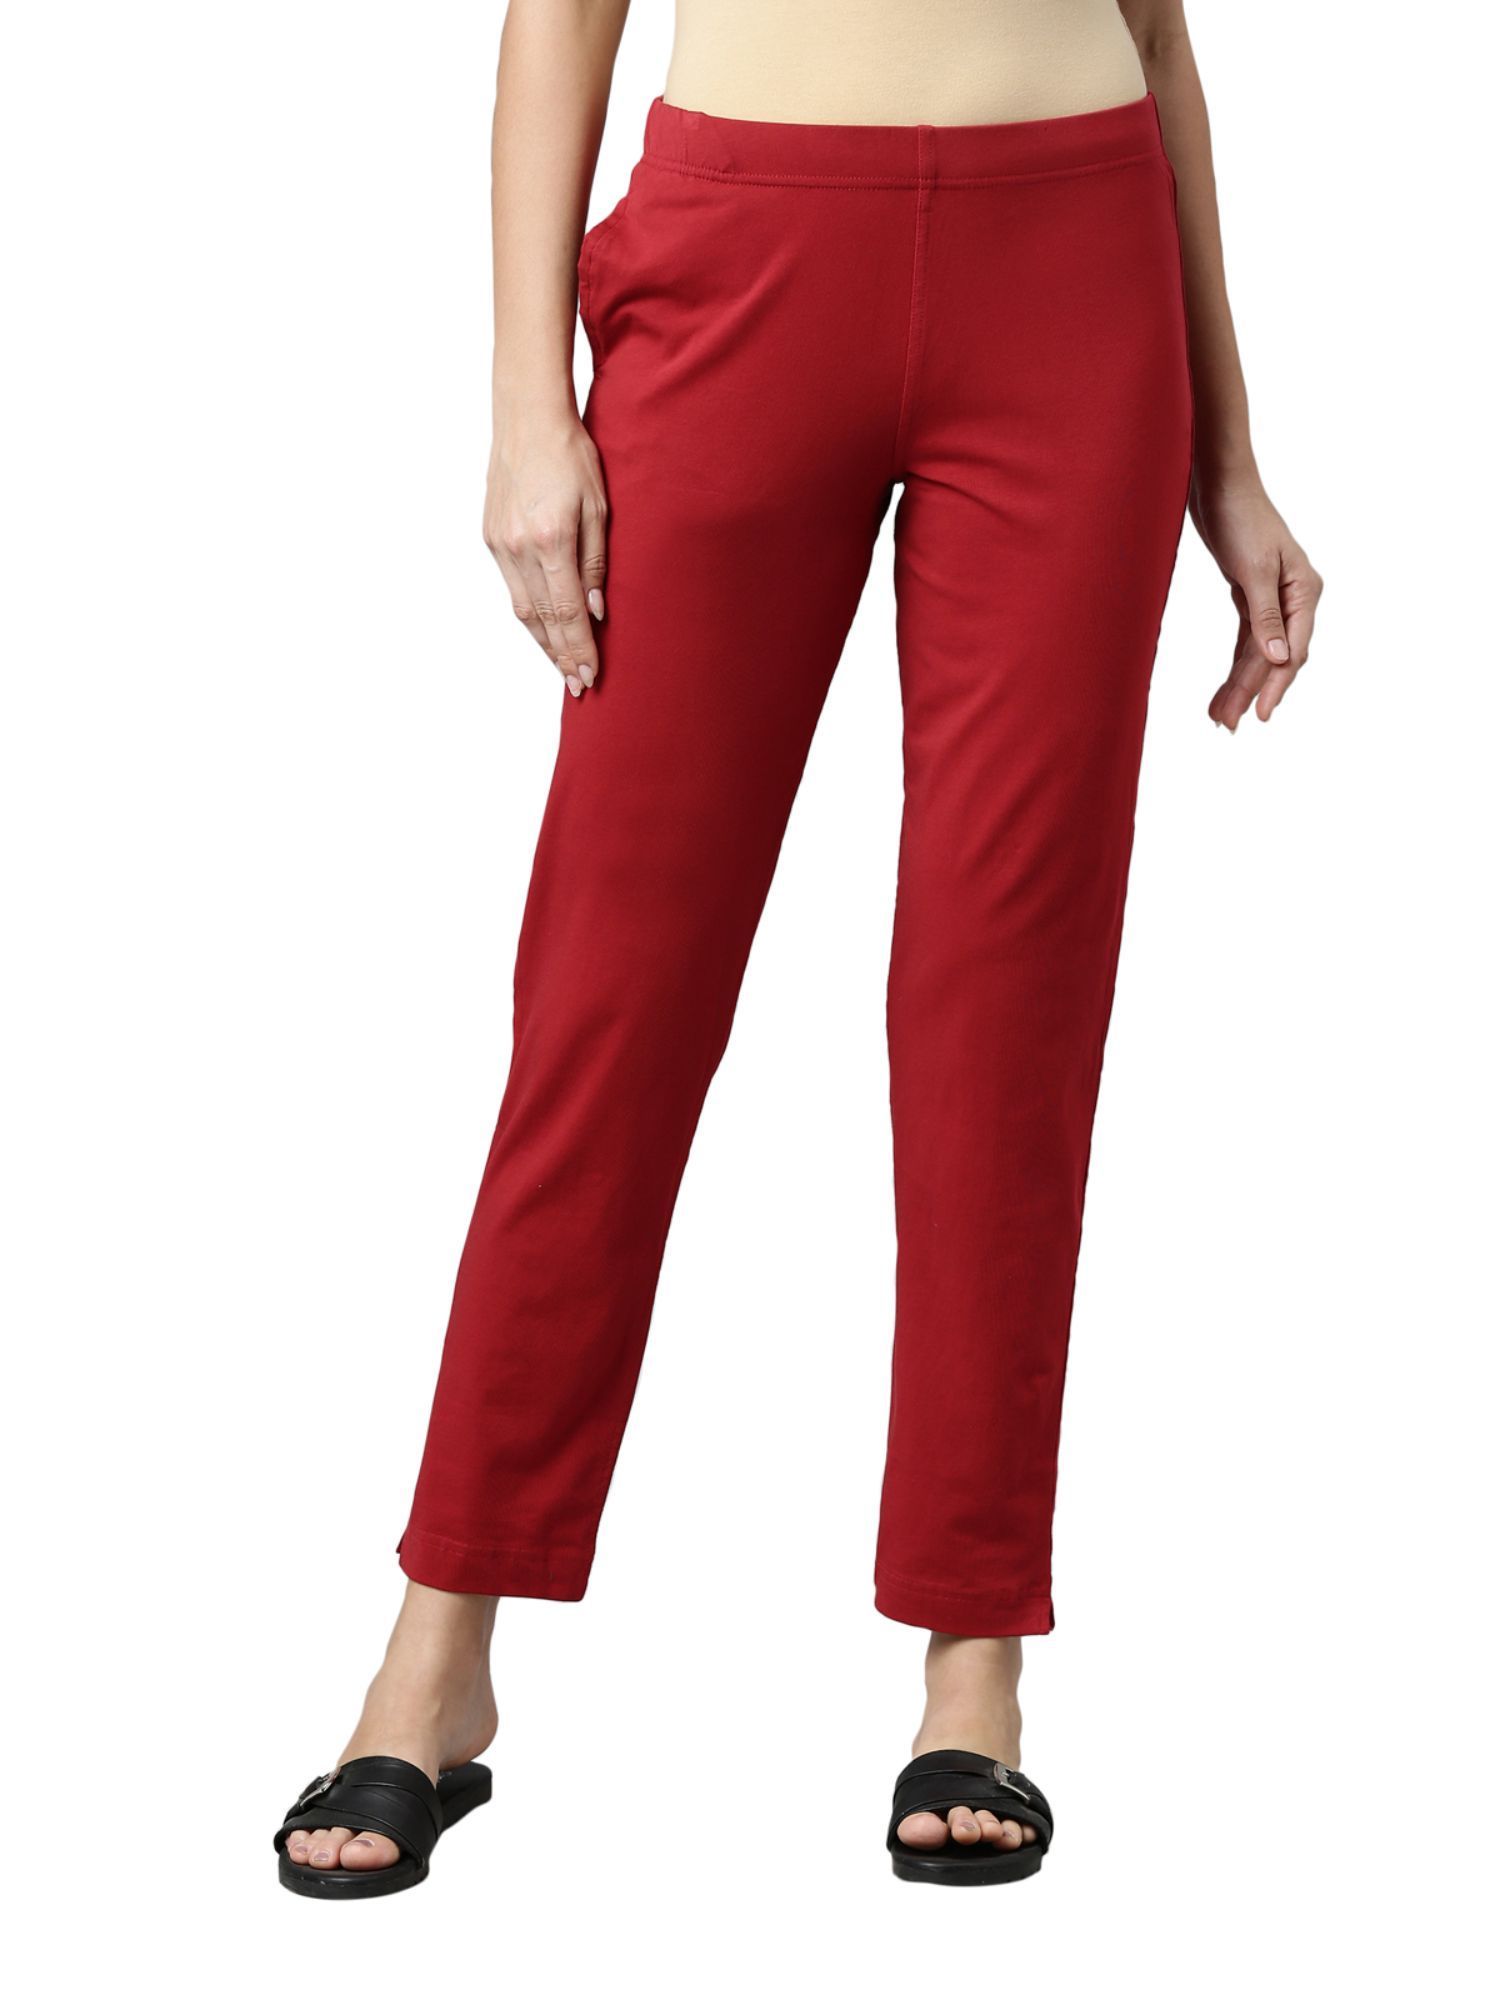 Buy Red Trousers  Pants for Women by DREAM  DZIRE Online  Ajiocom